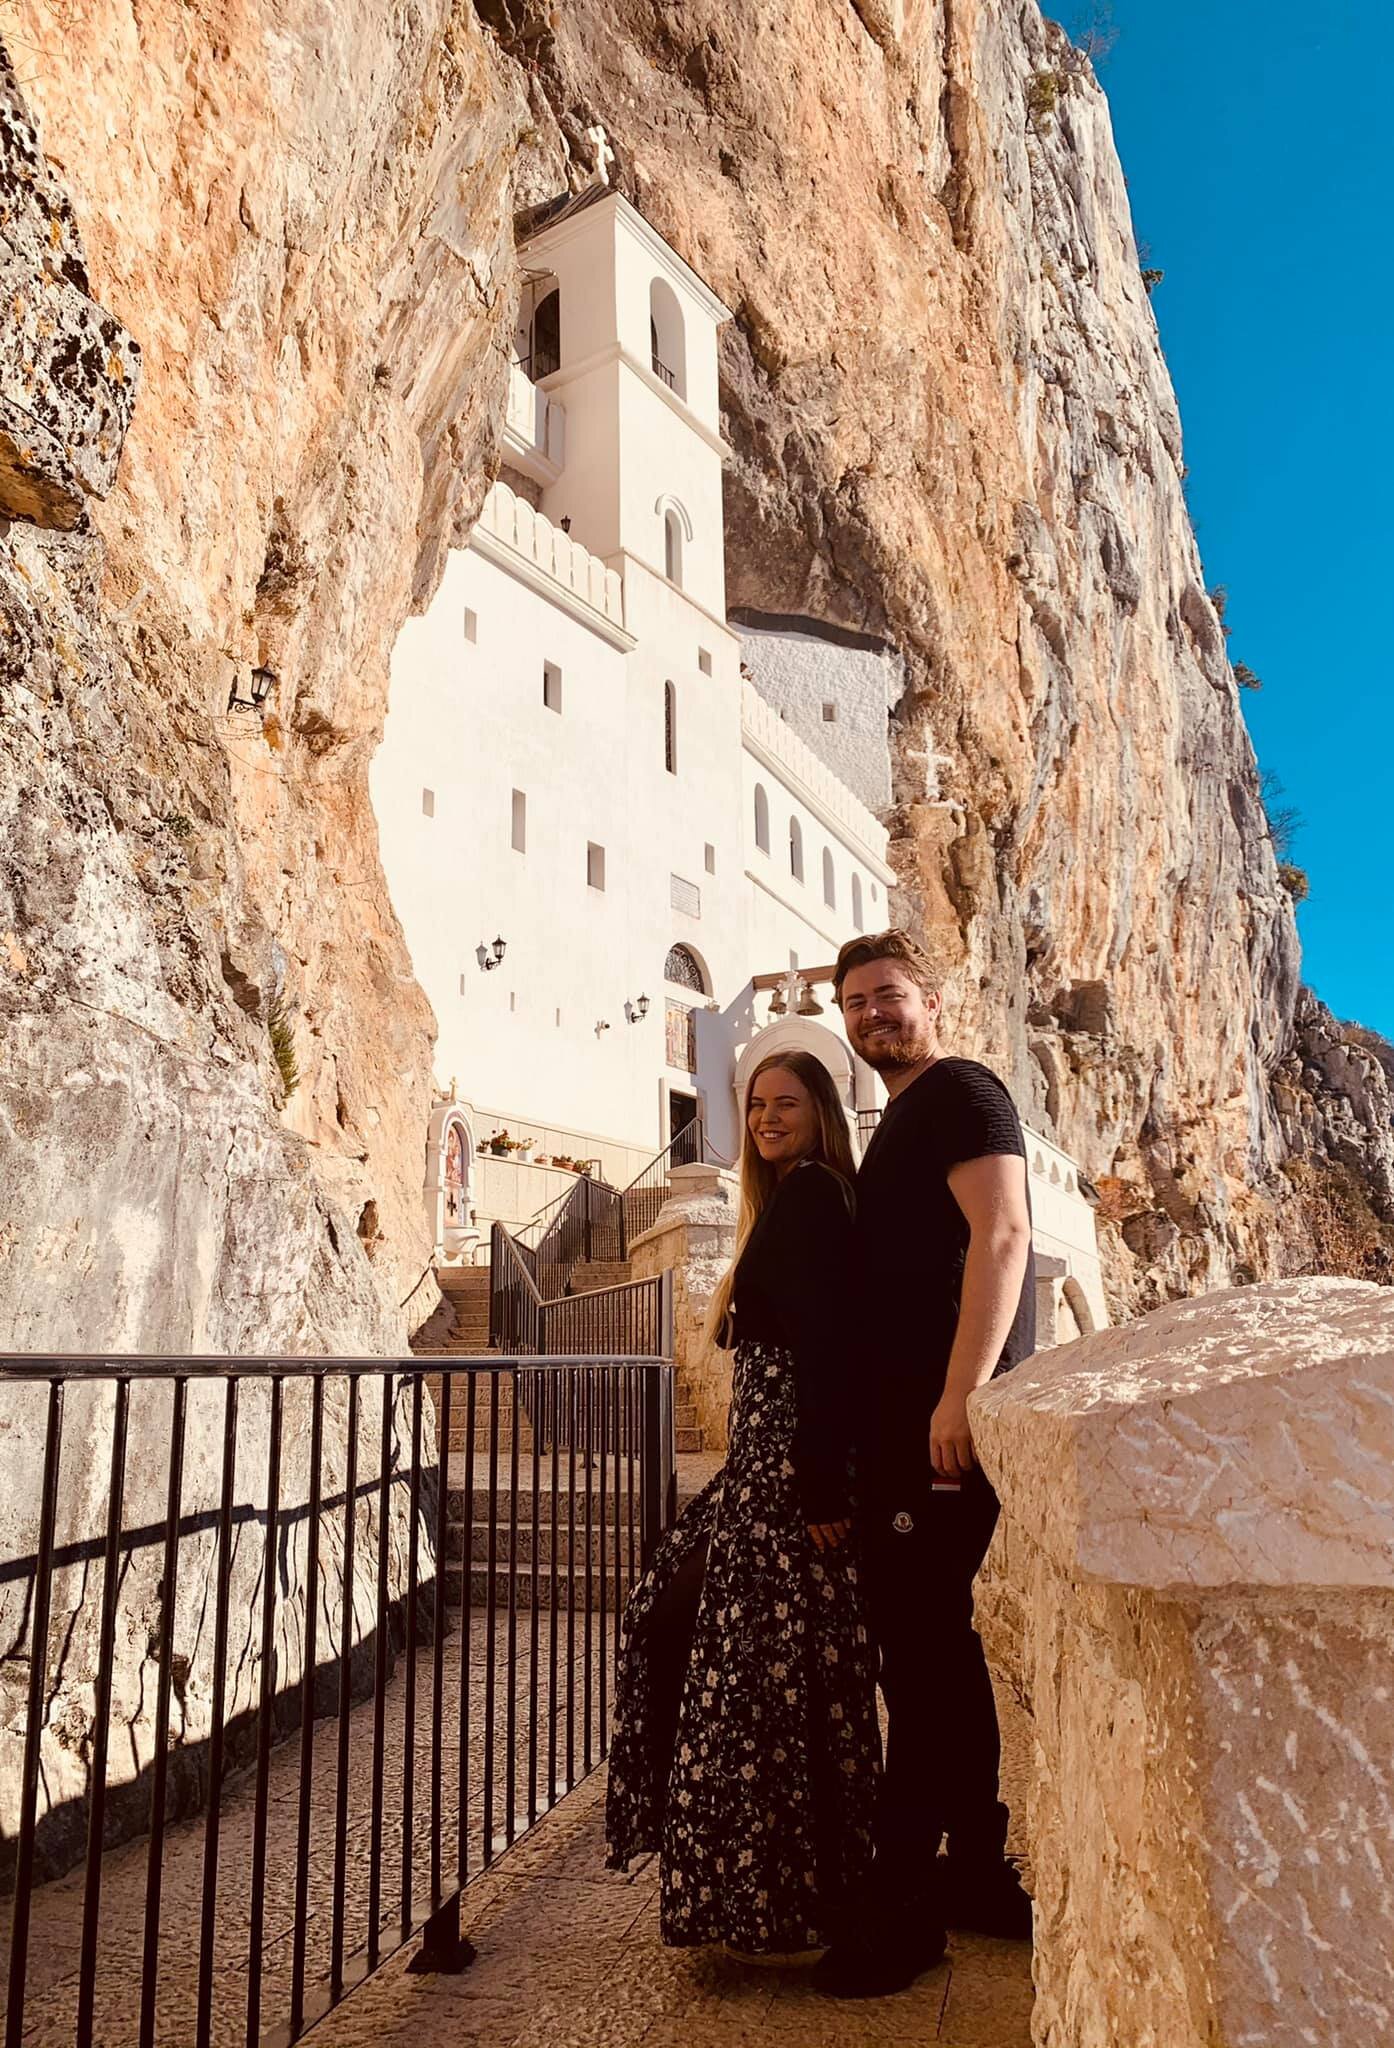 Hello from the Ostrog Monastery4.jpg